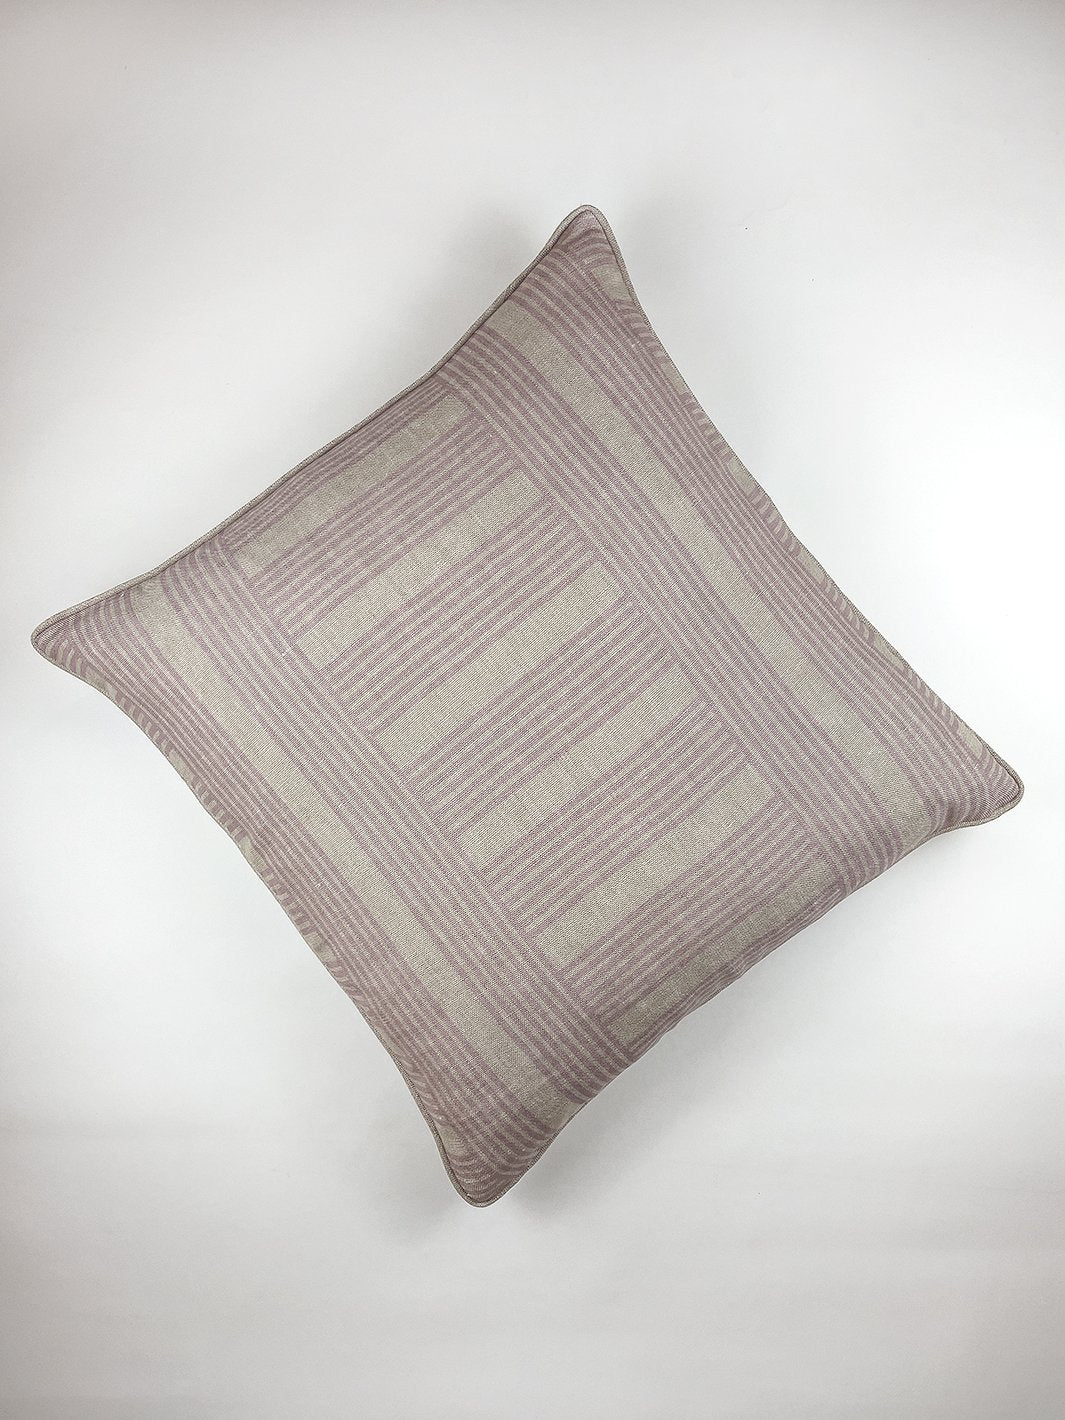 'Roman Holiday Grid' Throw Pillow by Barbie™ - Lilac